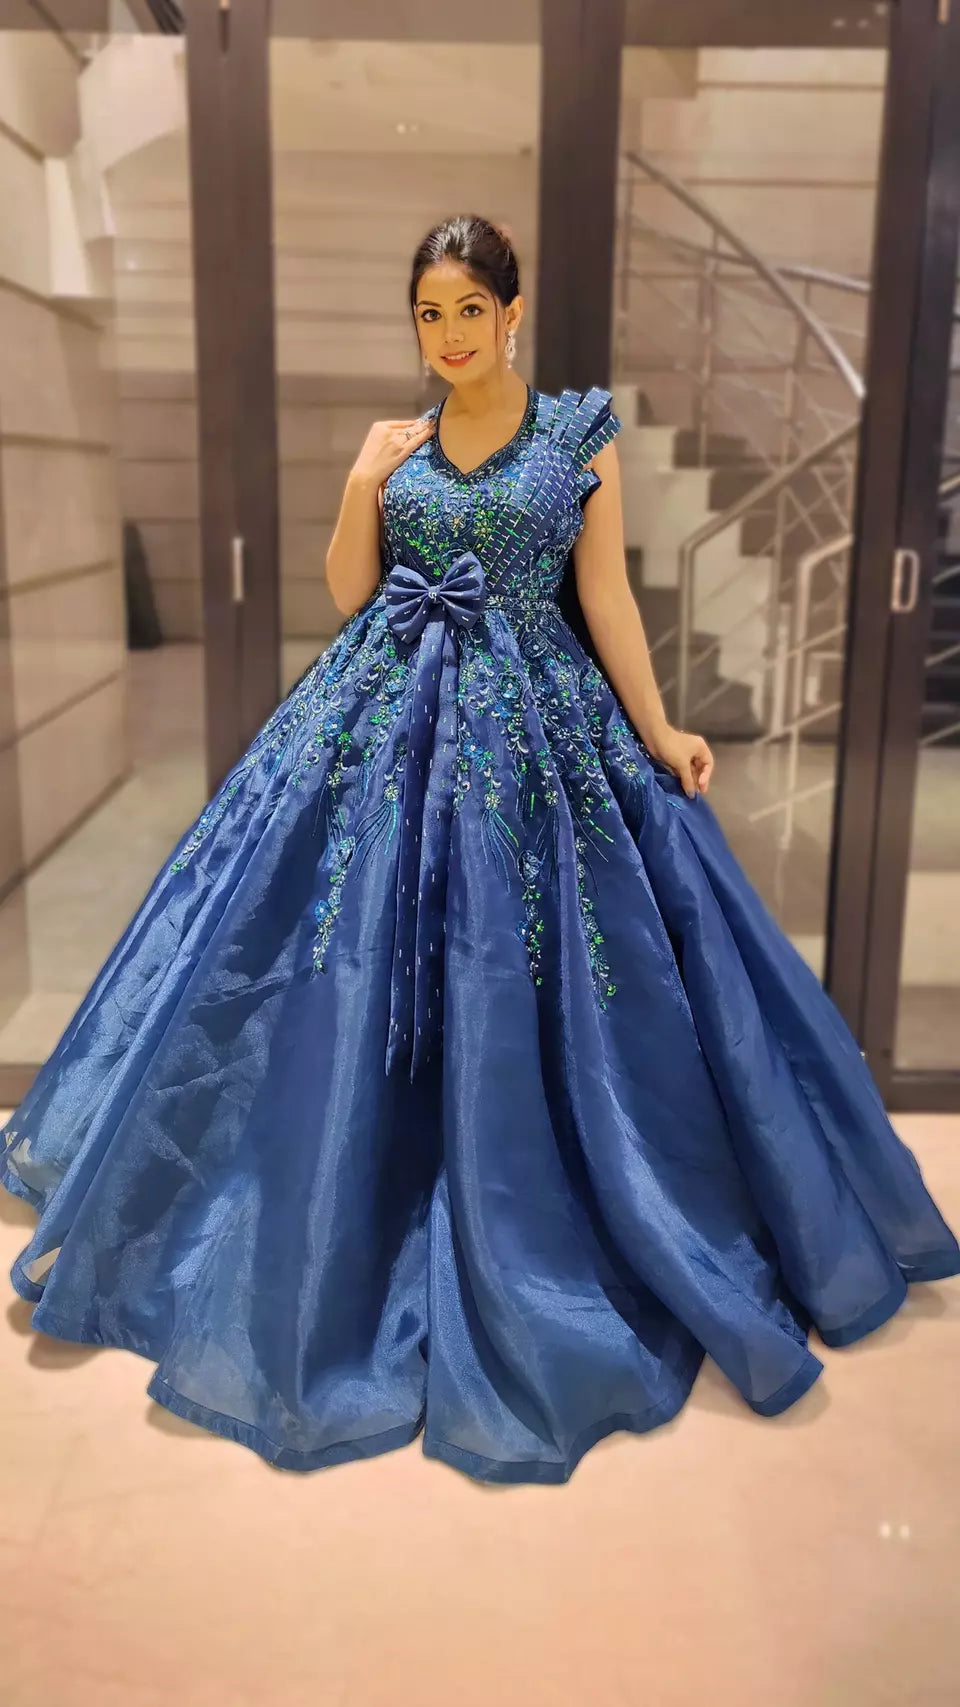 Doll Clothes For Barbie Princess Wedding Dress Noble Party Gown For Barbie  Dolls Fashion Design Outfit Best Gift For Girl Dolls - AliExpress